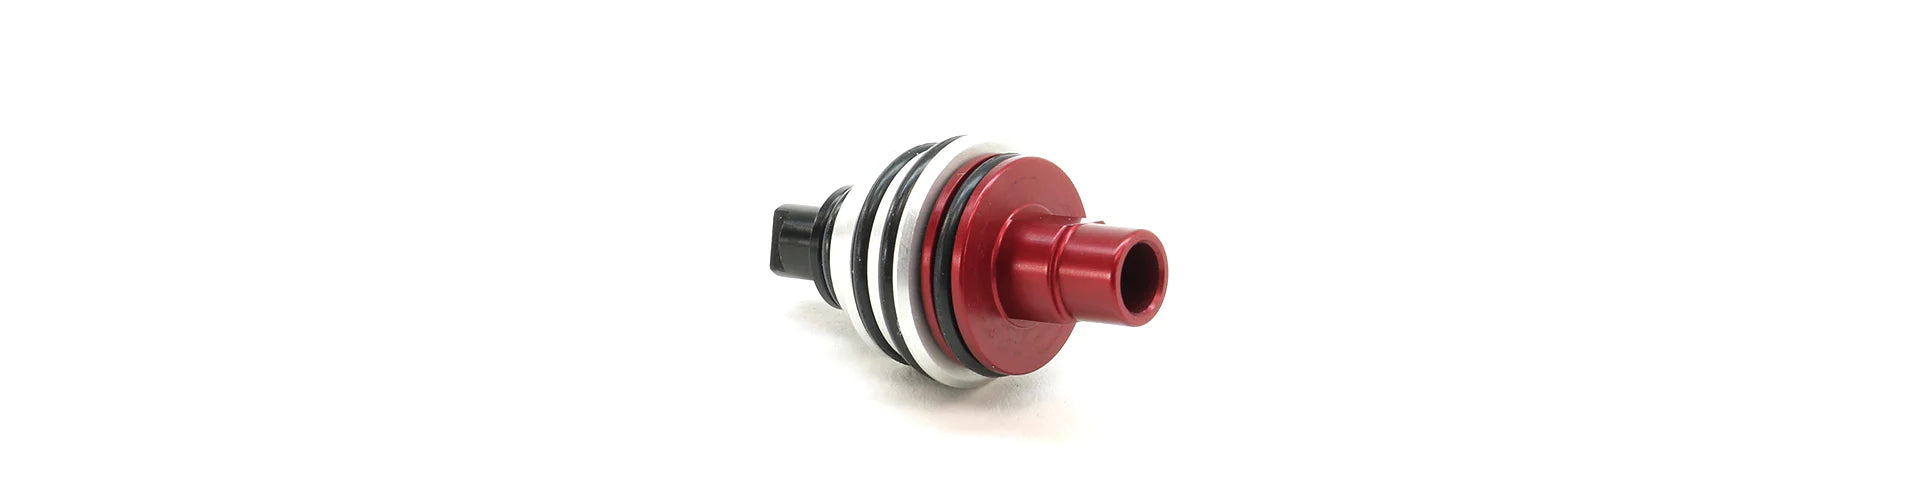 PolarStar Fusion Engine Low-Flow Poppet, Red - ssairsoft